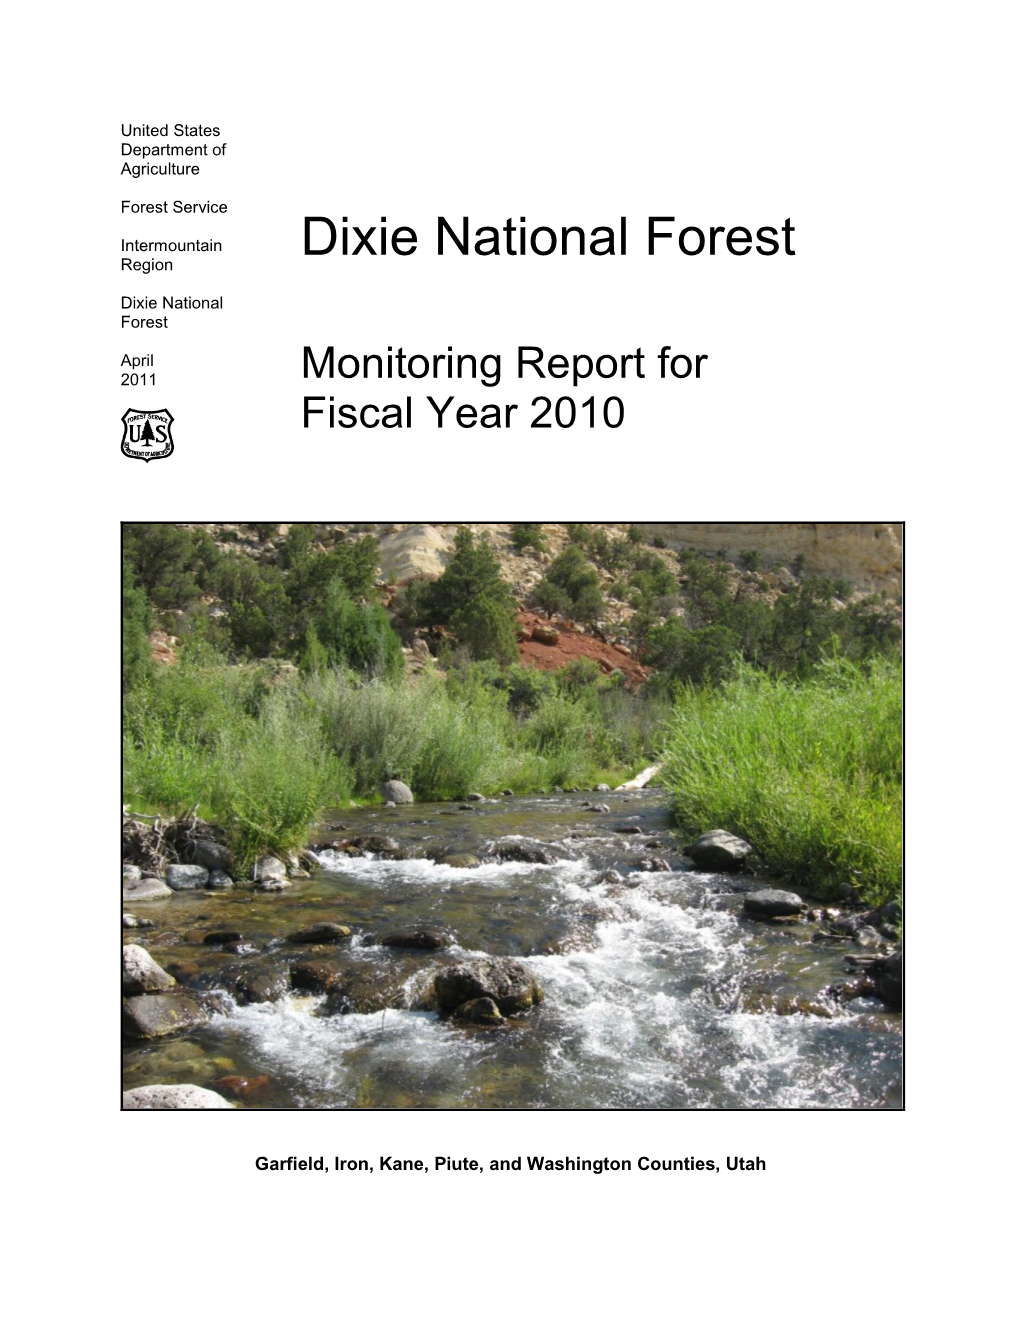 Forest Plan Monitoring Report for Fiscal Year 2010